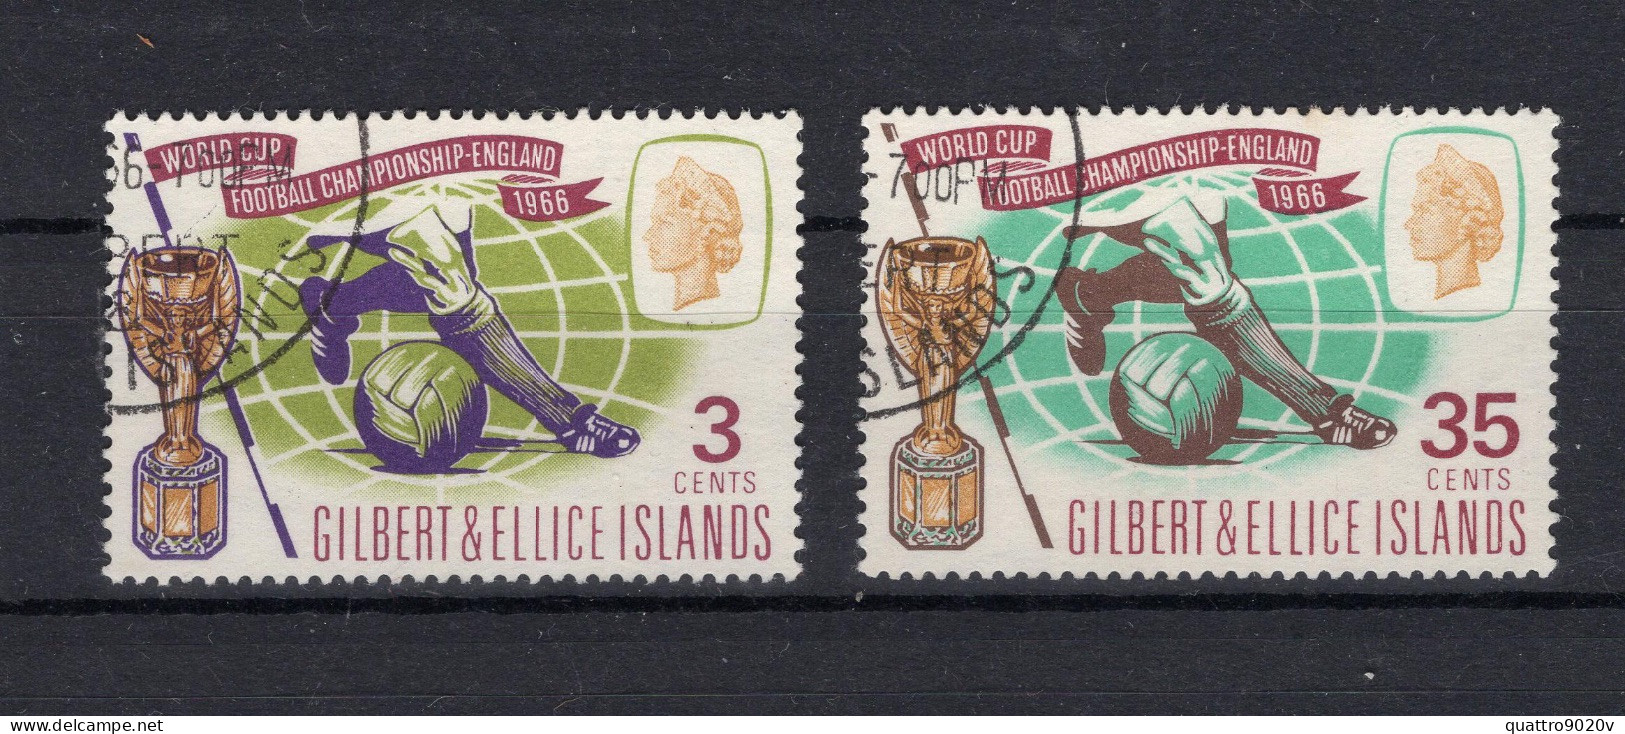 1966. World Cup Football Championship. Used (o) - Îles Gilbert Et Ellice (...-1979)